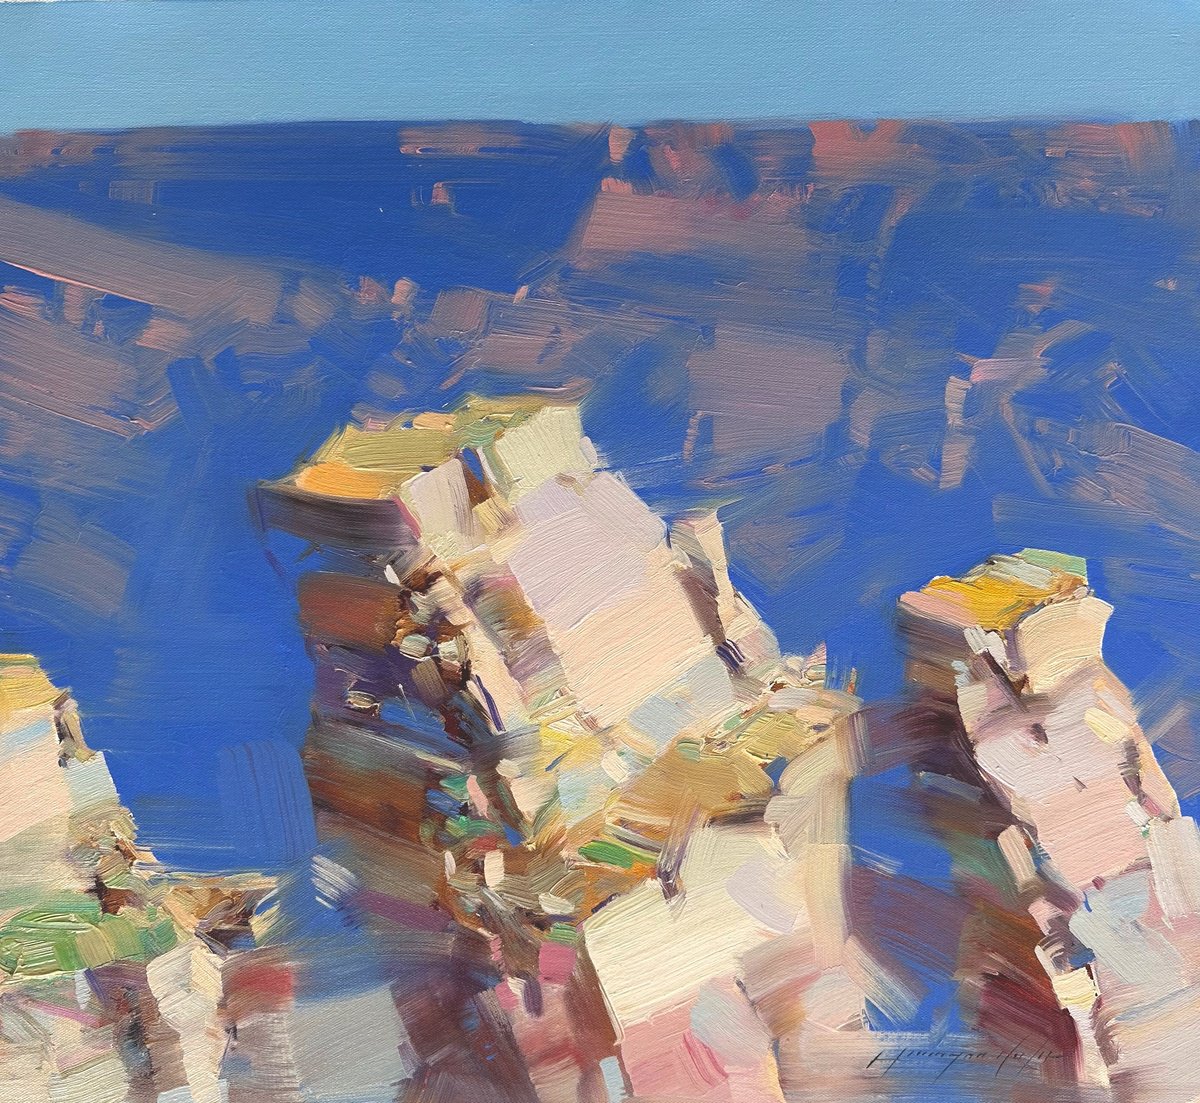 Canyon Rock, Original oil painting, Handmade artwork, One of a kind by Vahe Yeremyan